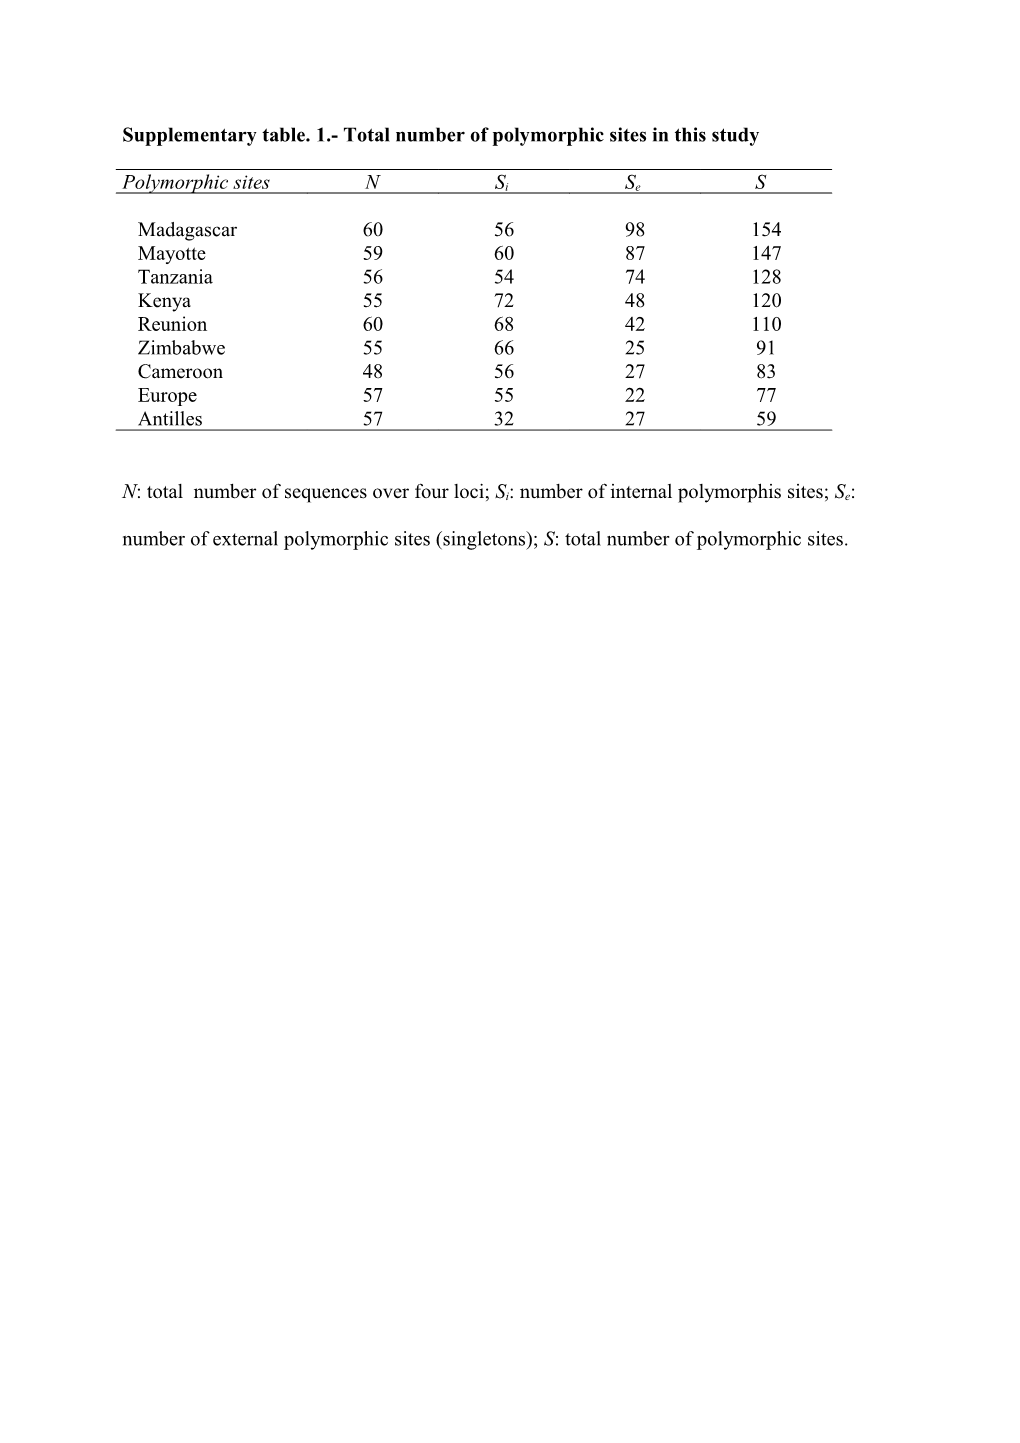 Supplementary Table. 1.- Total Number of Polymorphic Sites in This Study